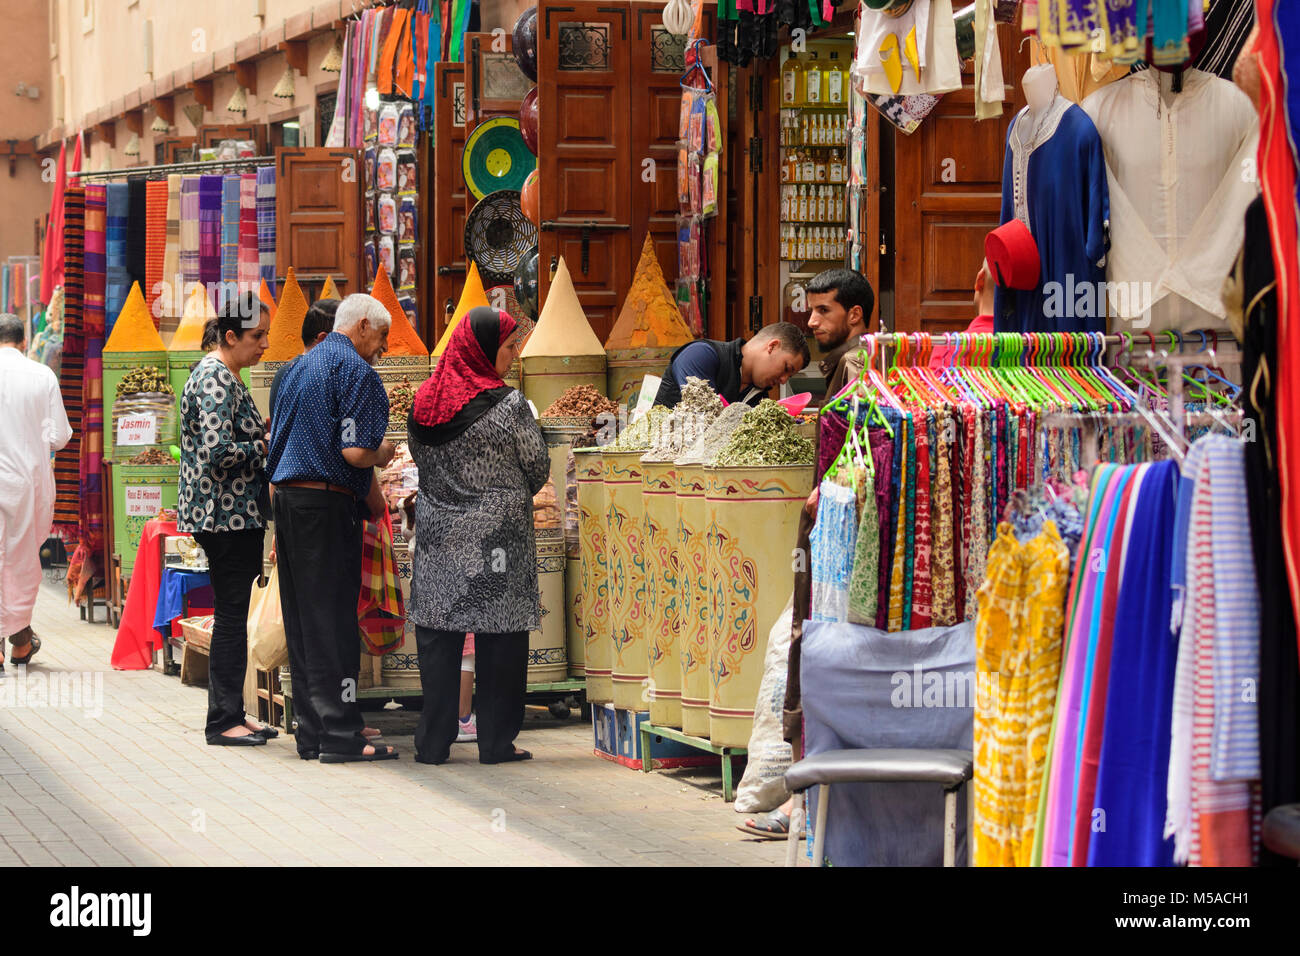 Il Marocco, Marrakech, Medina, Souk, persone in street market, Africa Africa, Nord Africa, del Maghreb Foto Stock